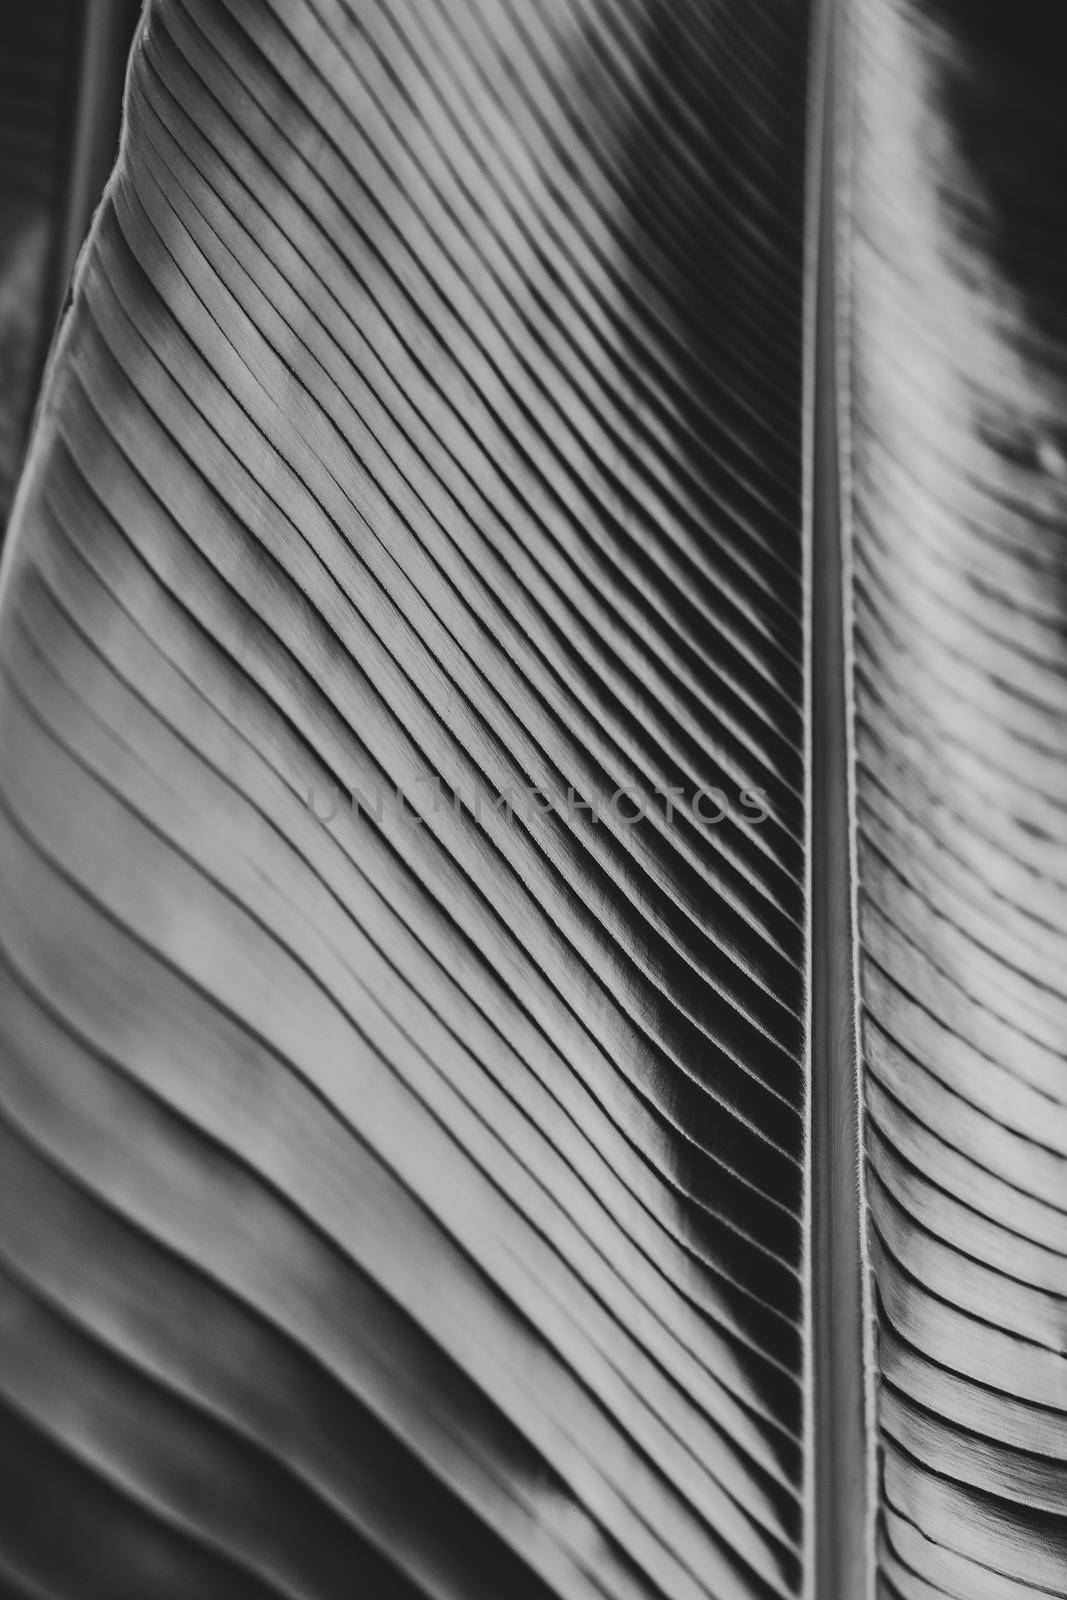 Abstract striped natural of banana leaf background, Details and texture of banana leaf, Tropical banana leaf